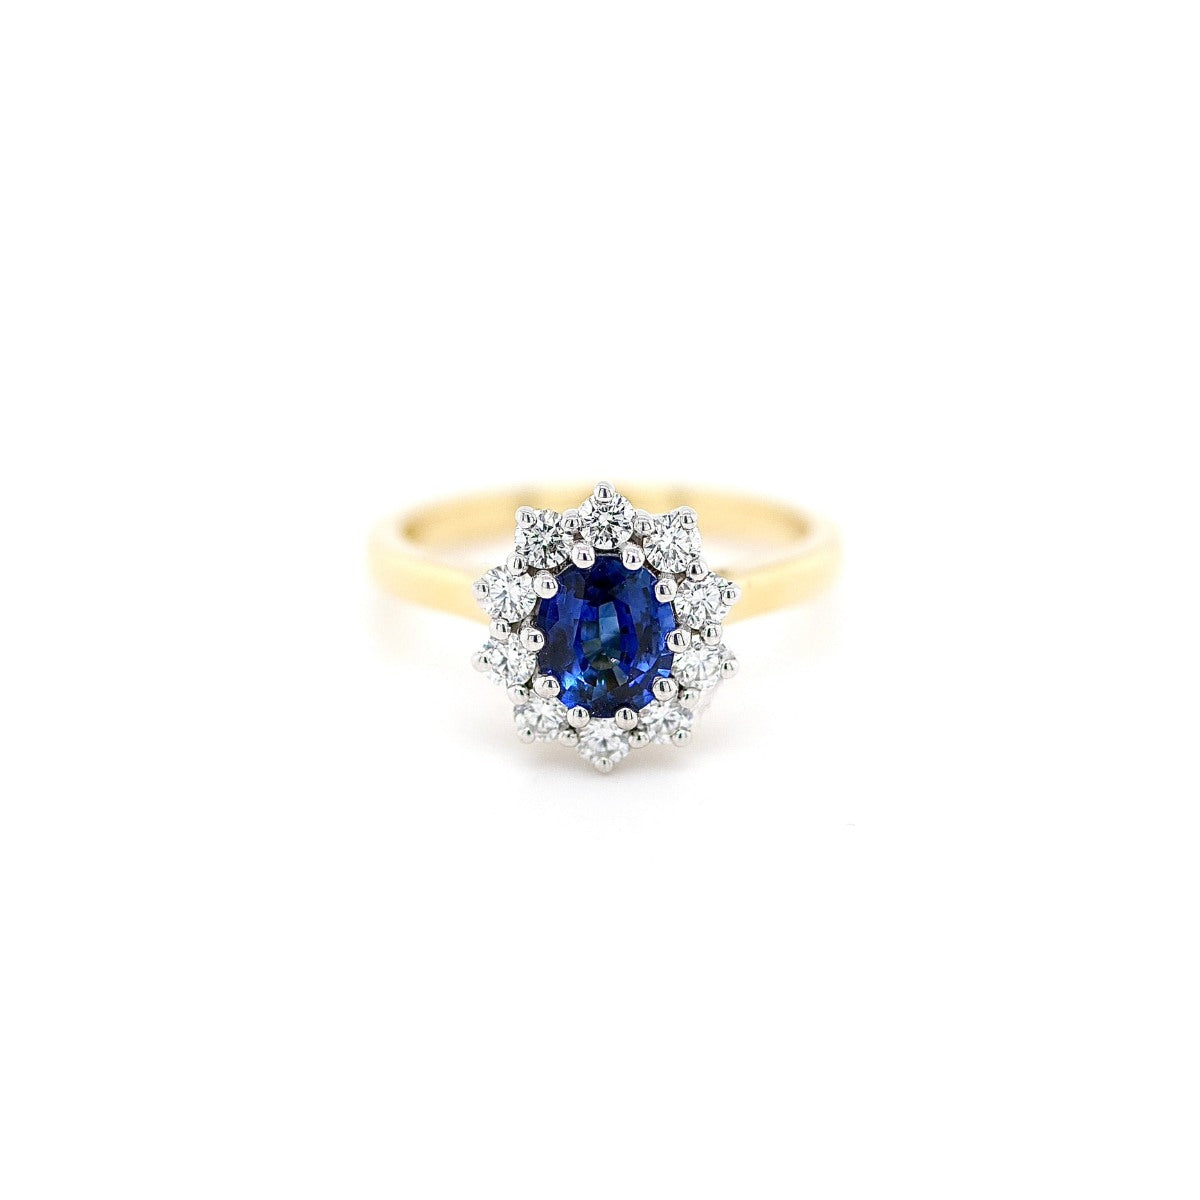 18ct Yellow & White Gold Sapphire & Diamond Cluster Ring - Size N